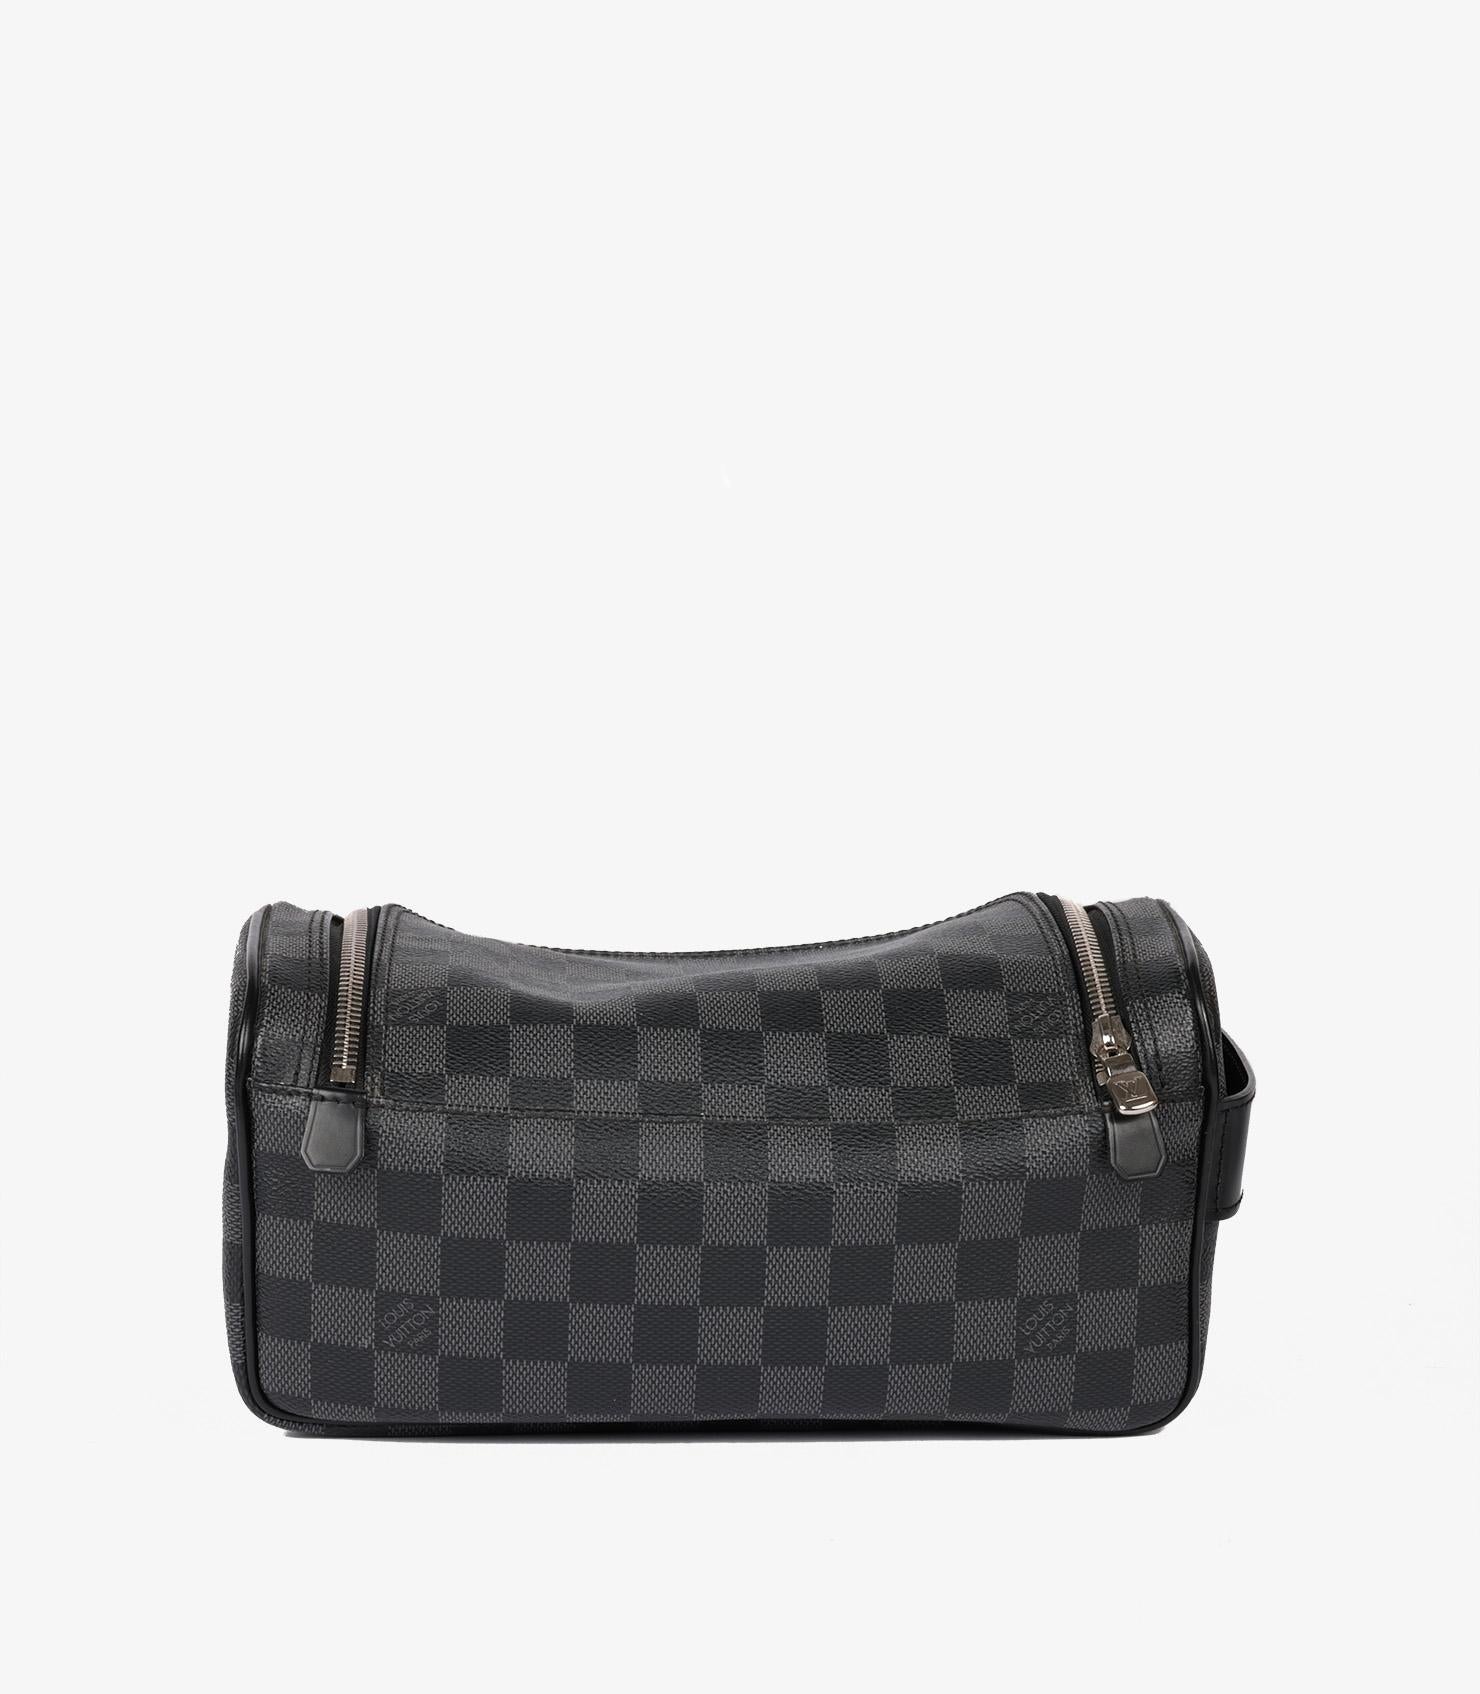 Louis Vuitton Damier Graphite Coated Canvas Toiletry Pouch

Brand- Louis Vuitton
Model- Toiletry Pouch
Product Type- Pouch
Serial Number- BA****
Age- Circa 2014
Colour- Black
Hardware- Silver
Material(s)- Coated Canvas
Authenticity Details- Date